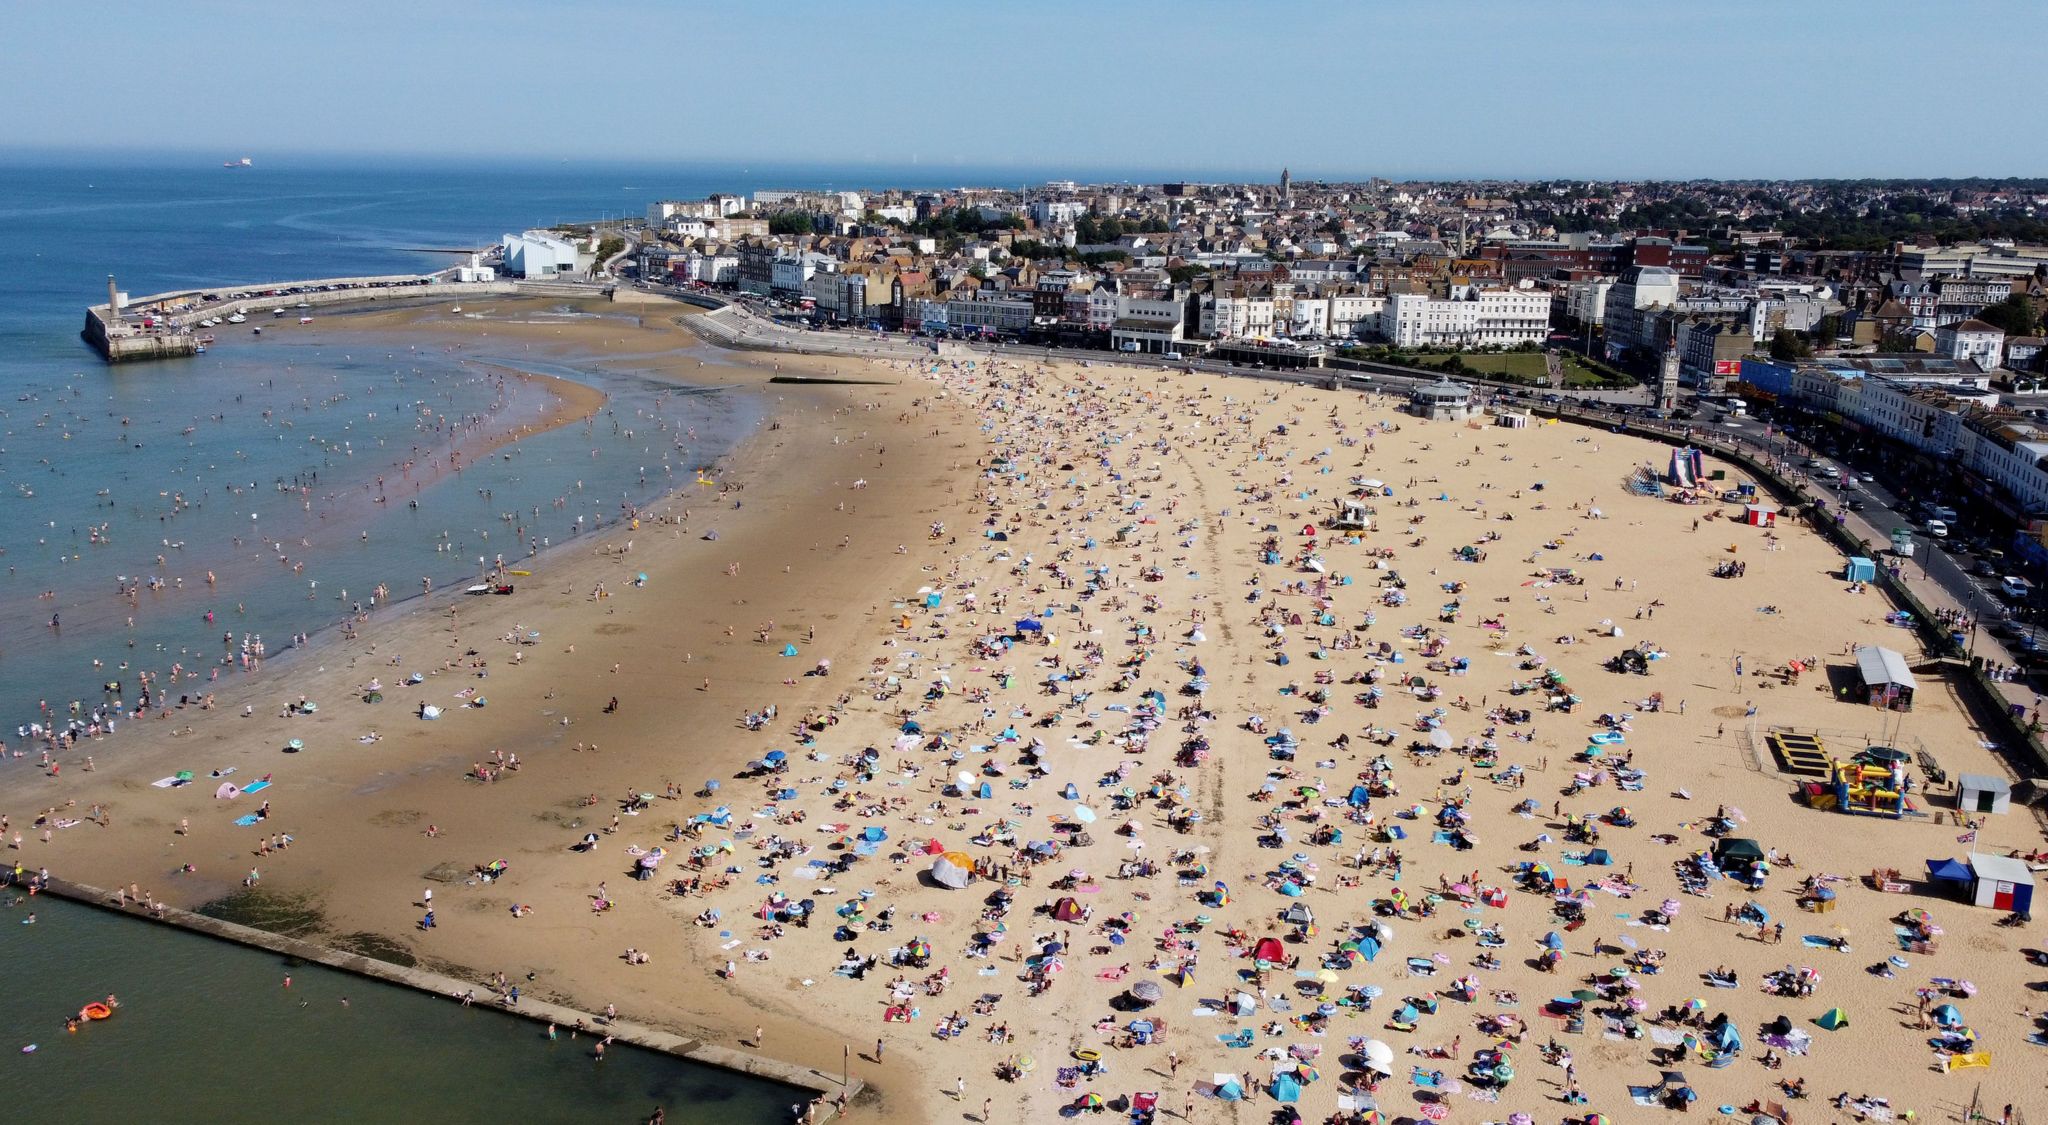 A crowded beach in the UK